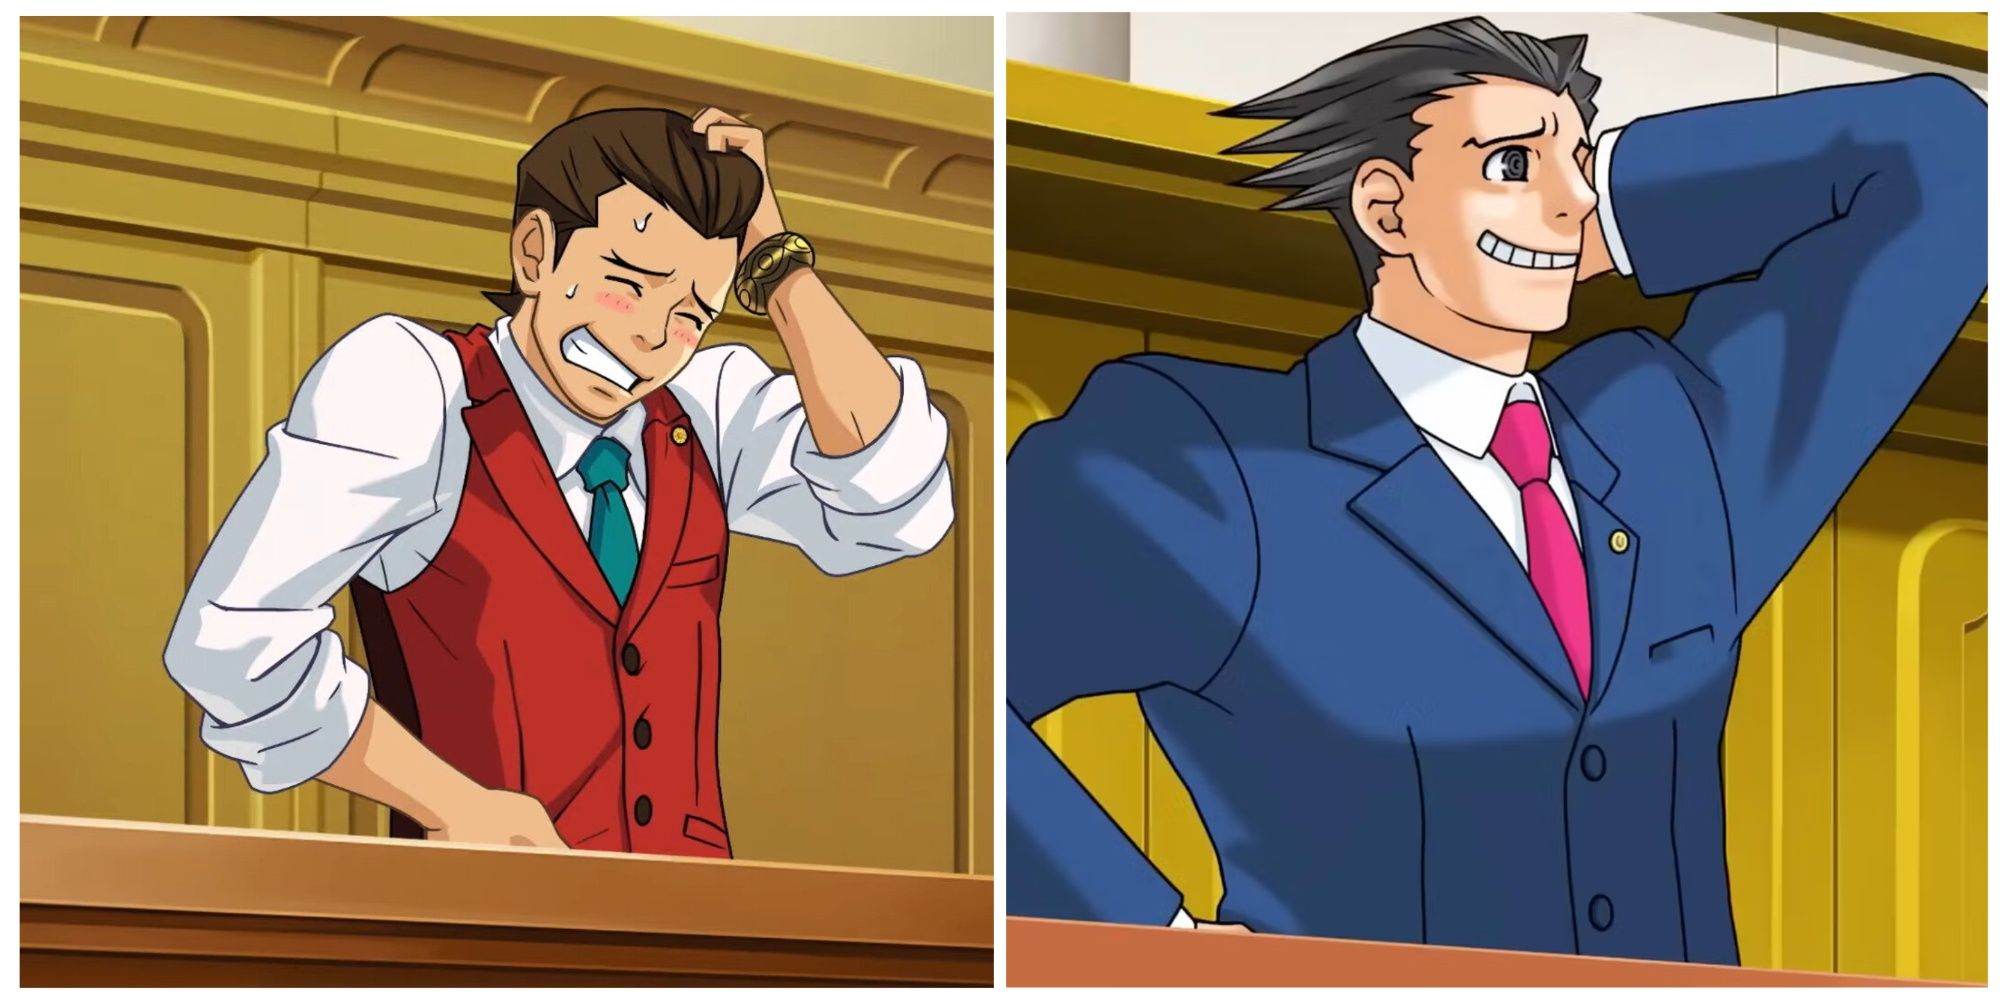 Apollo Justice; blushing and smiling awkwardly with a toothy grin and his hand on his head and Phoenix Wright; smiling awkwardly with a toothy grin and his hand on his head 